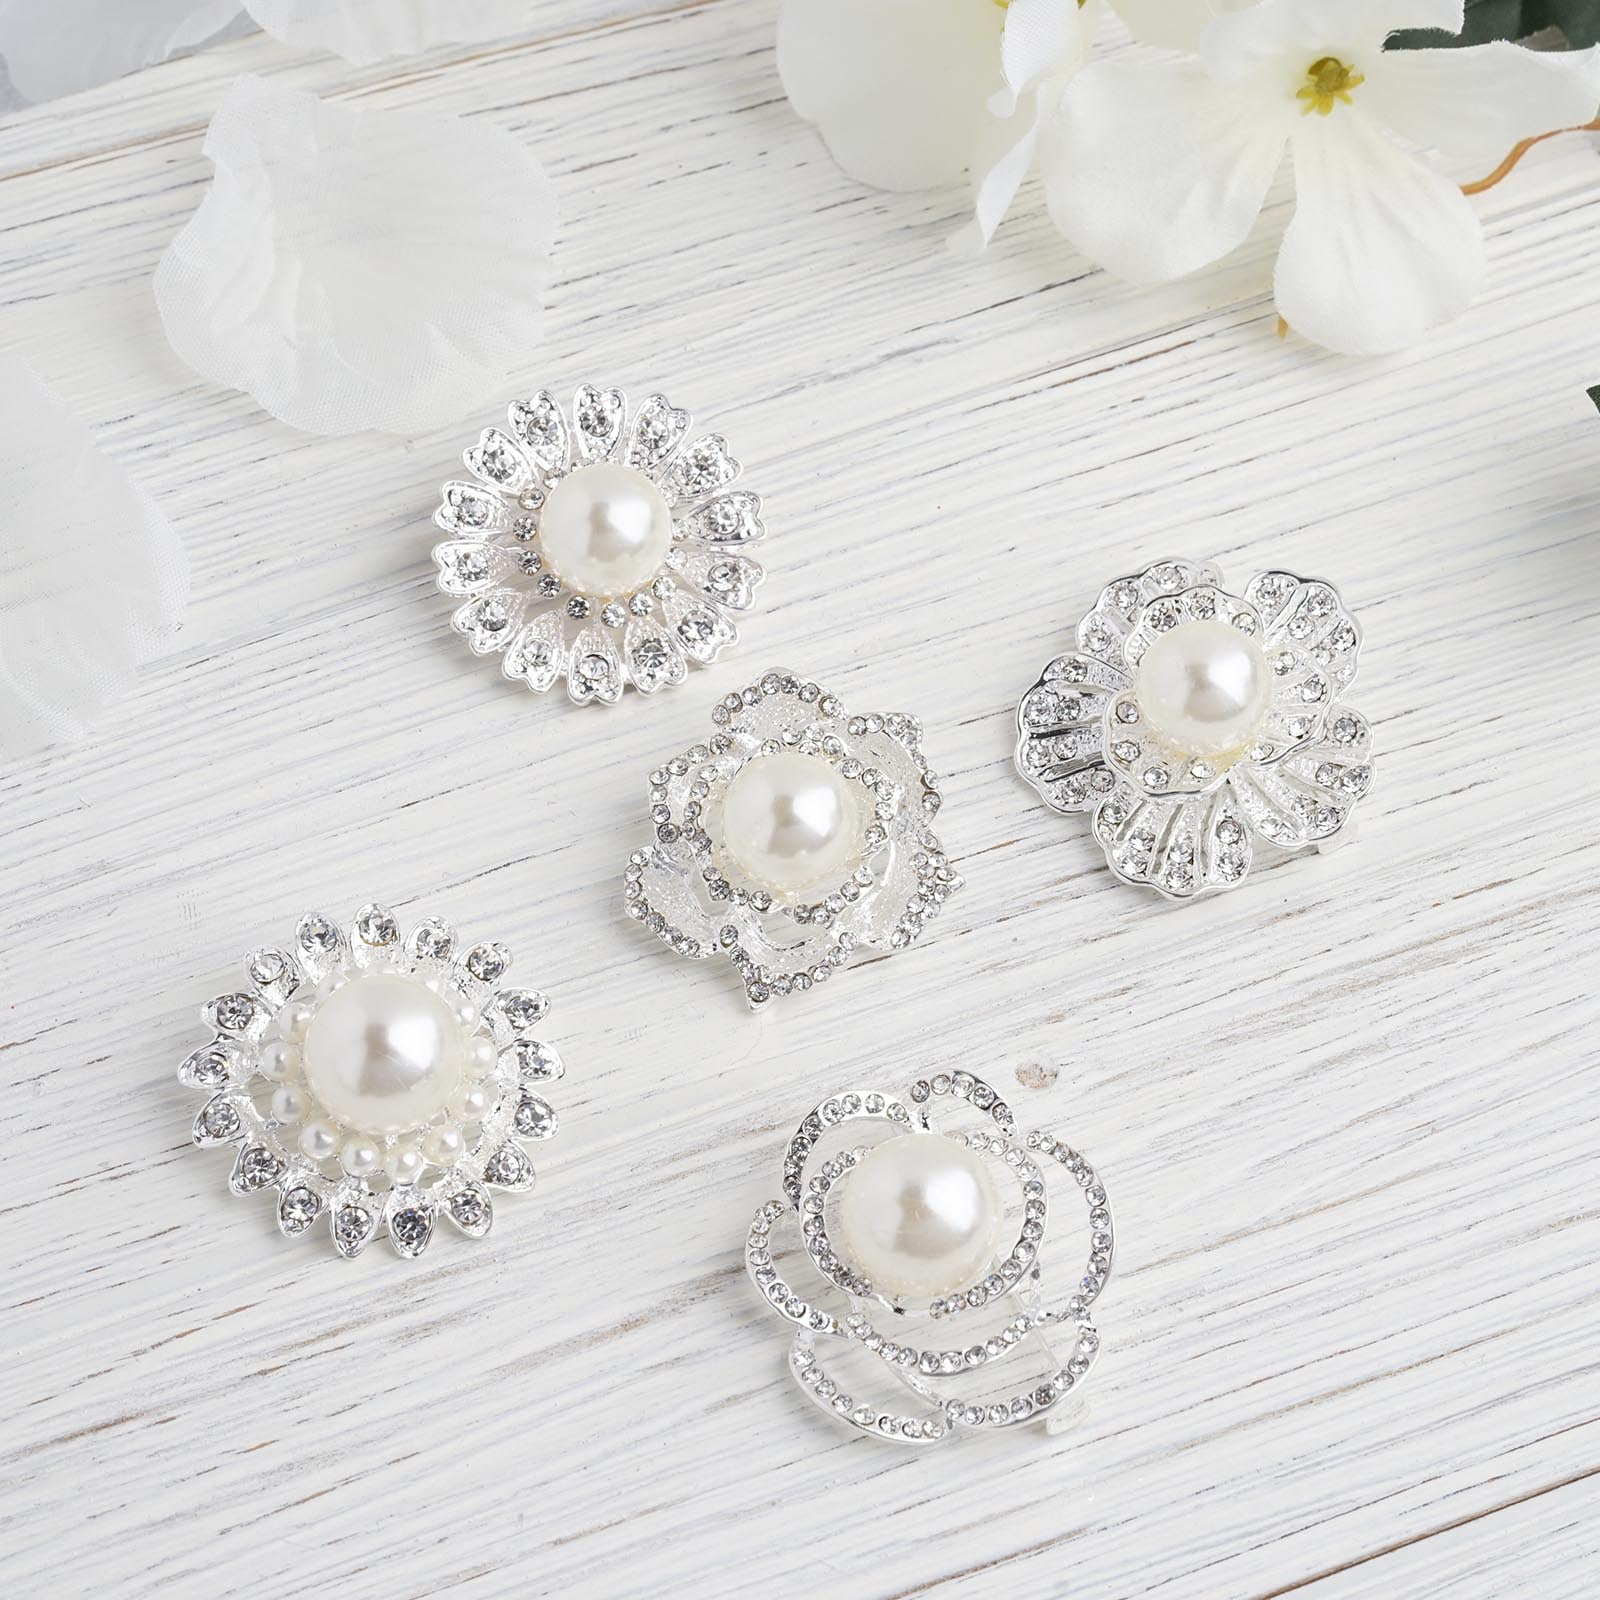 NEW SILVER FLOWER BROOCH LARGE FAUX PEARL DIAMANTE CRYSTAL WEDDING PARTY BROACH